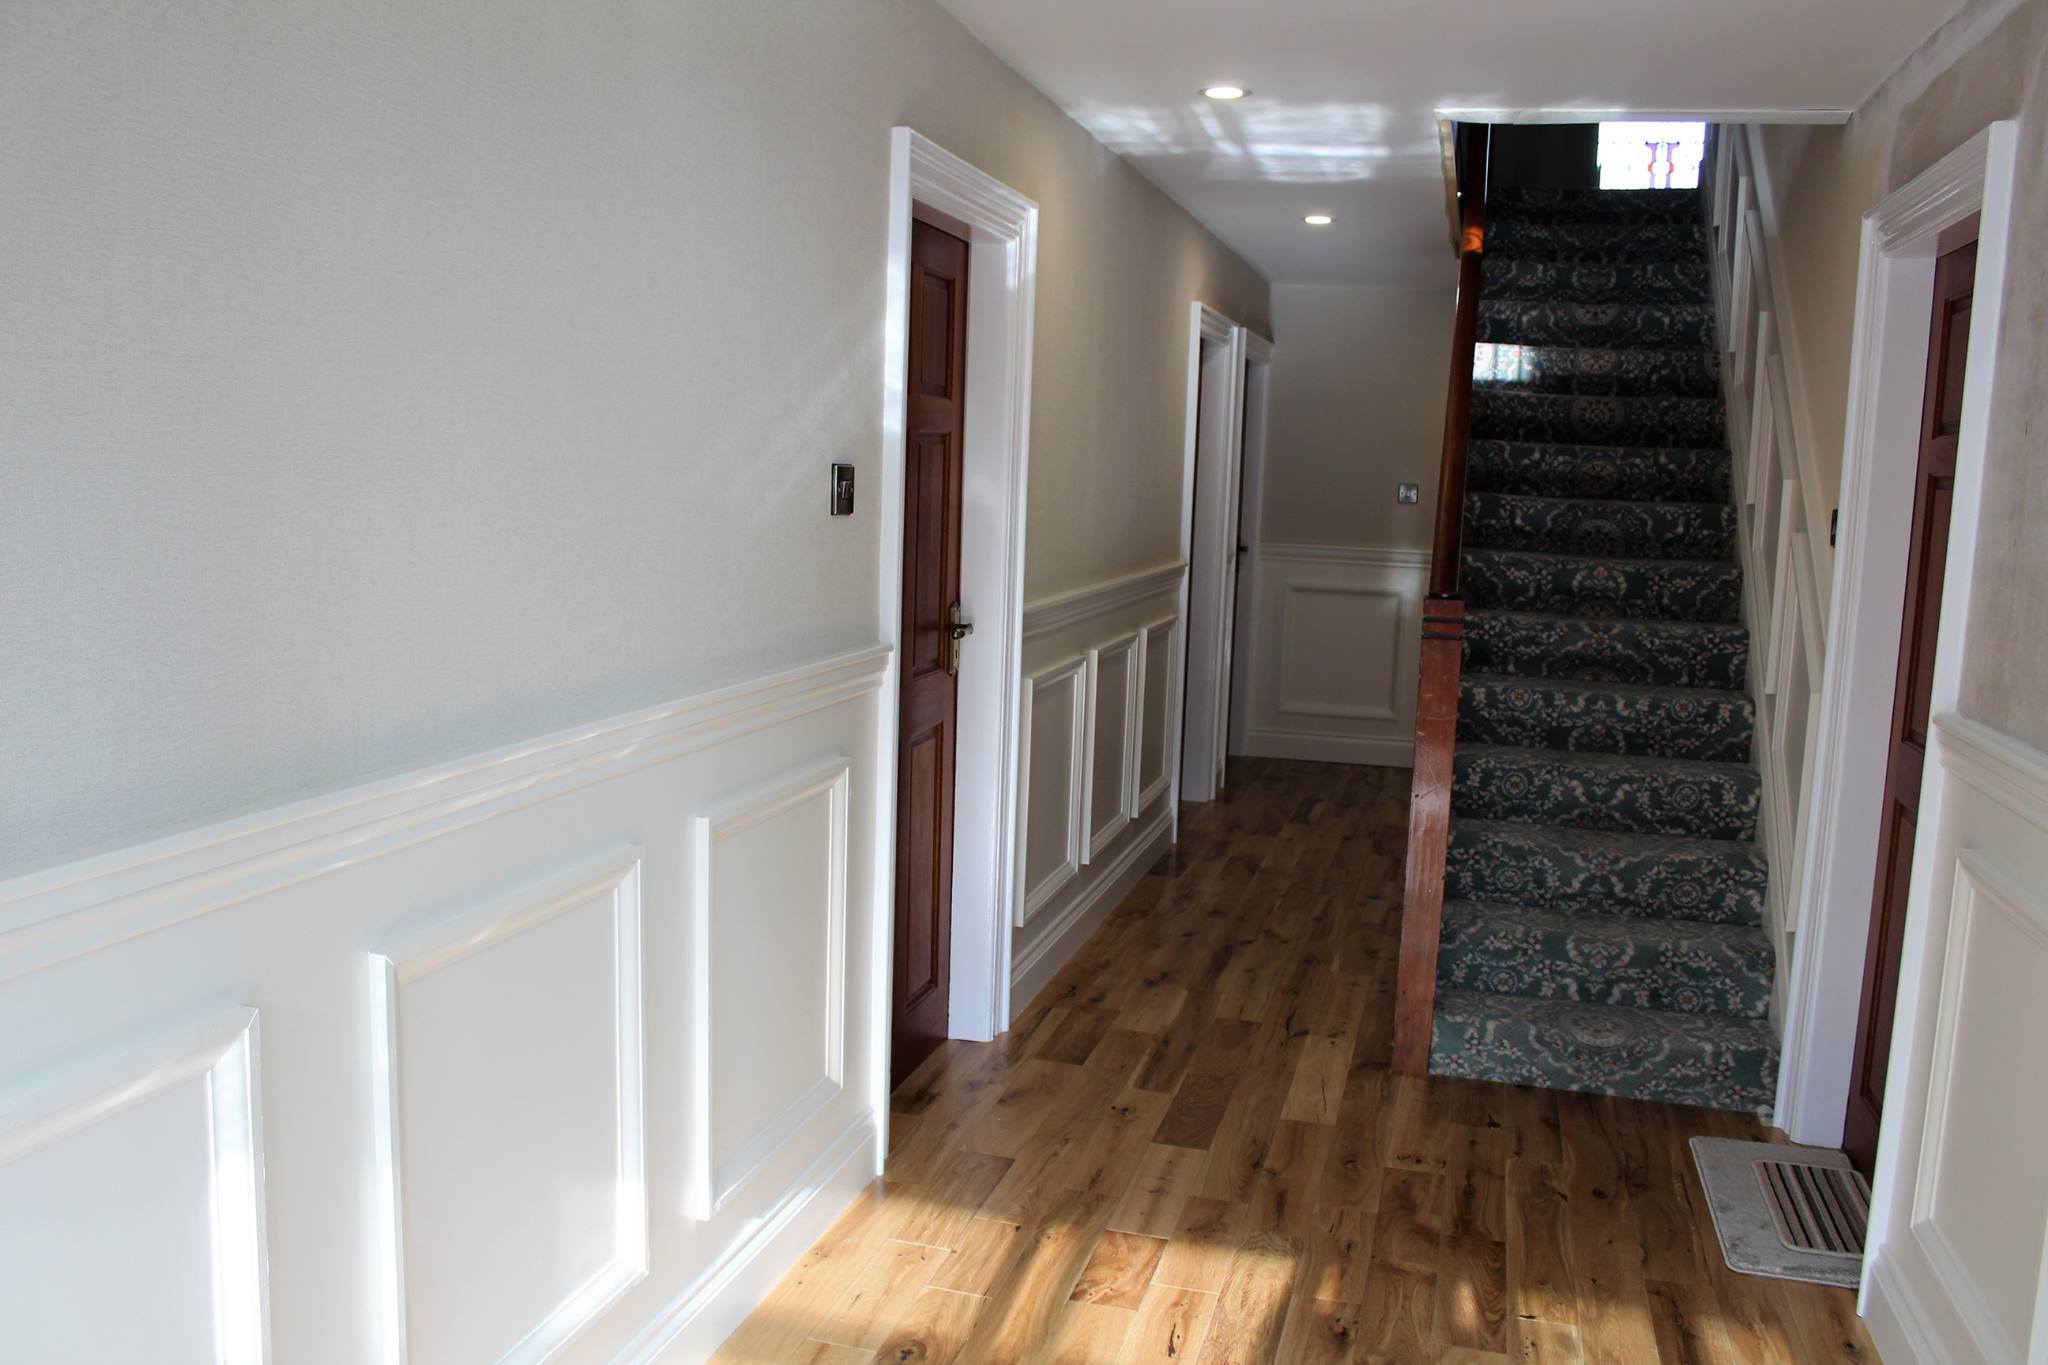 Hallway Panelling – What Every User Should Consider